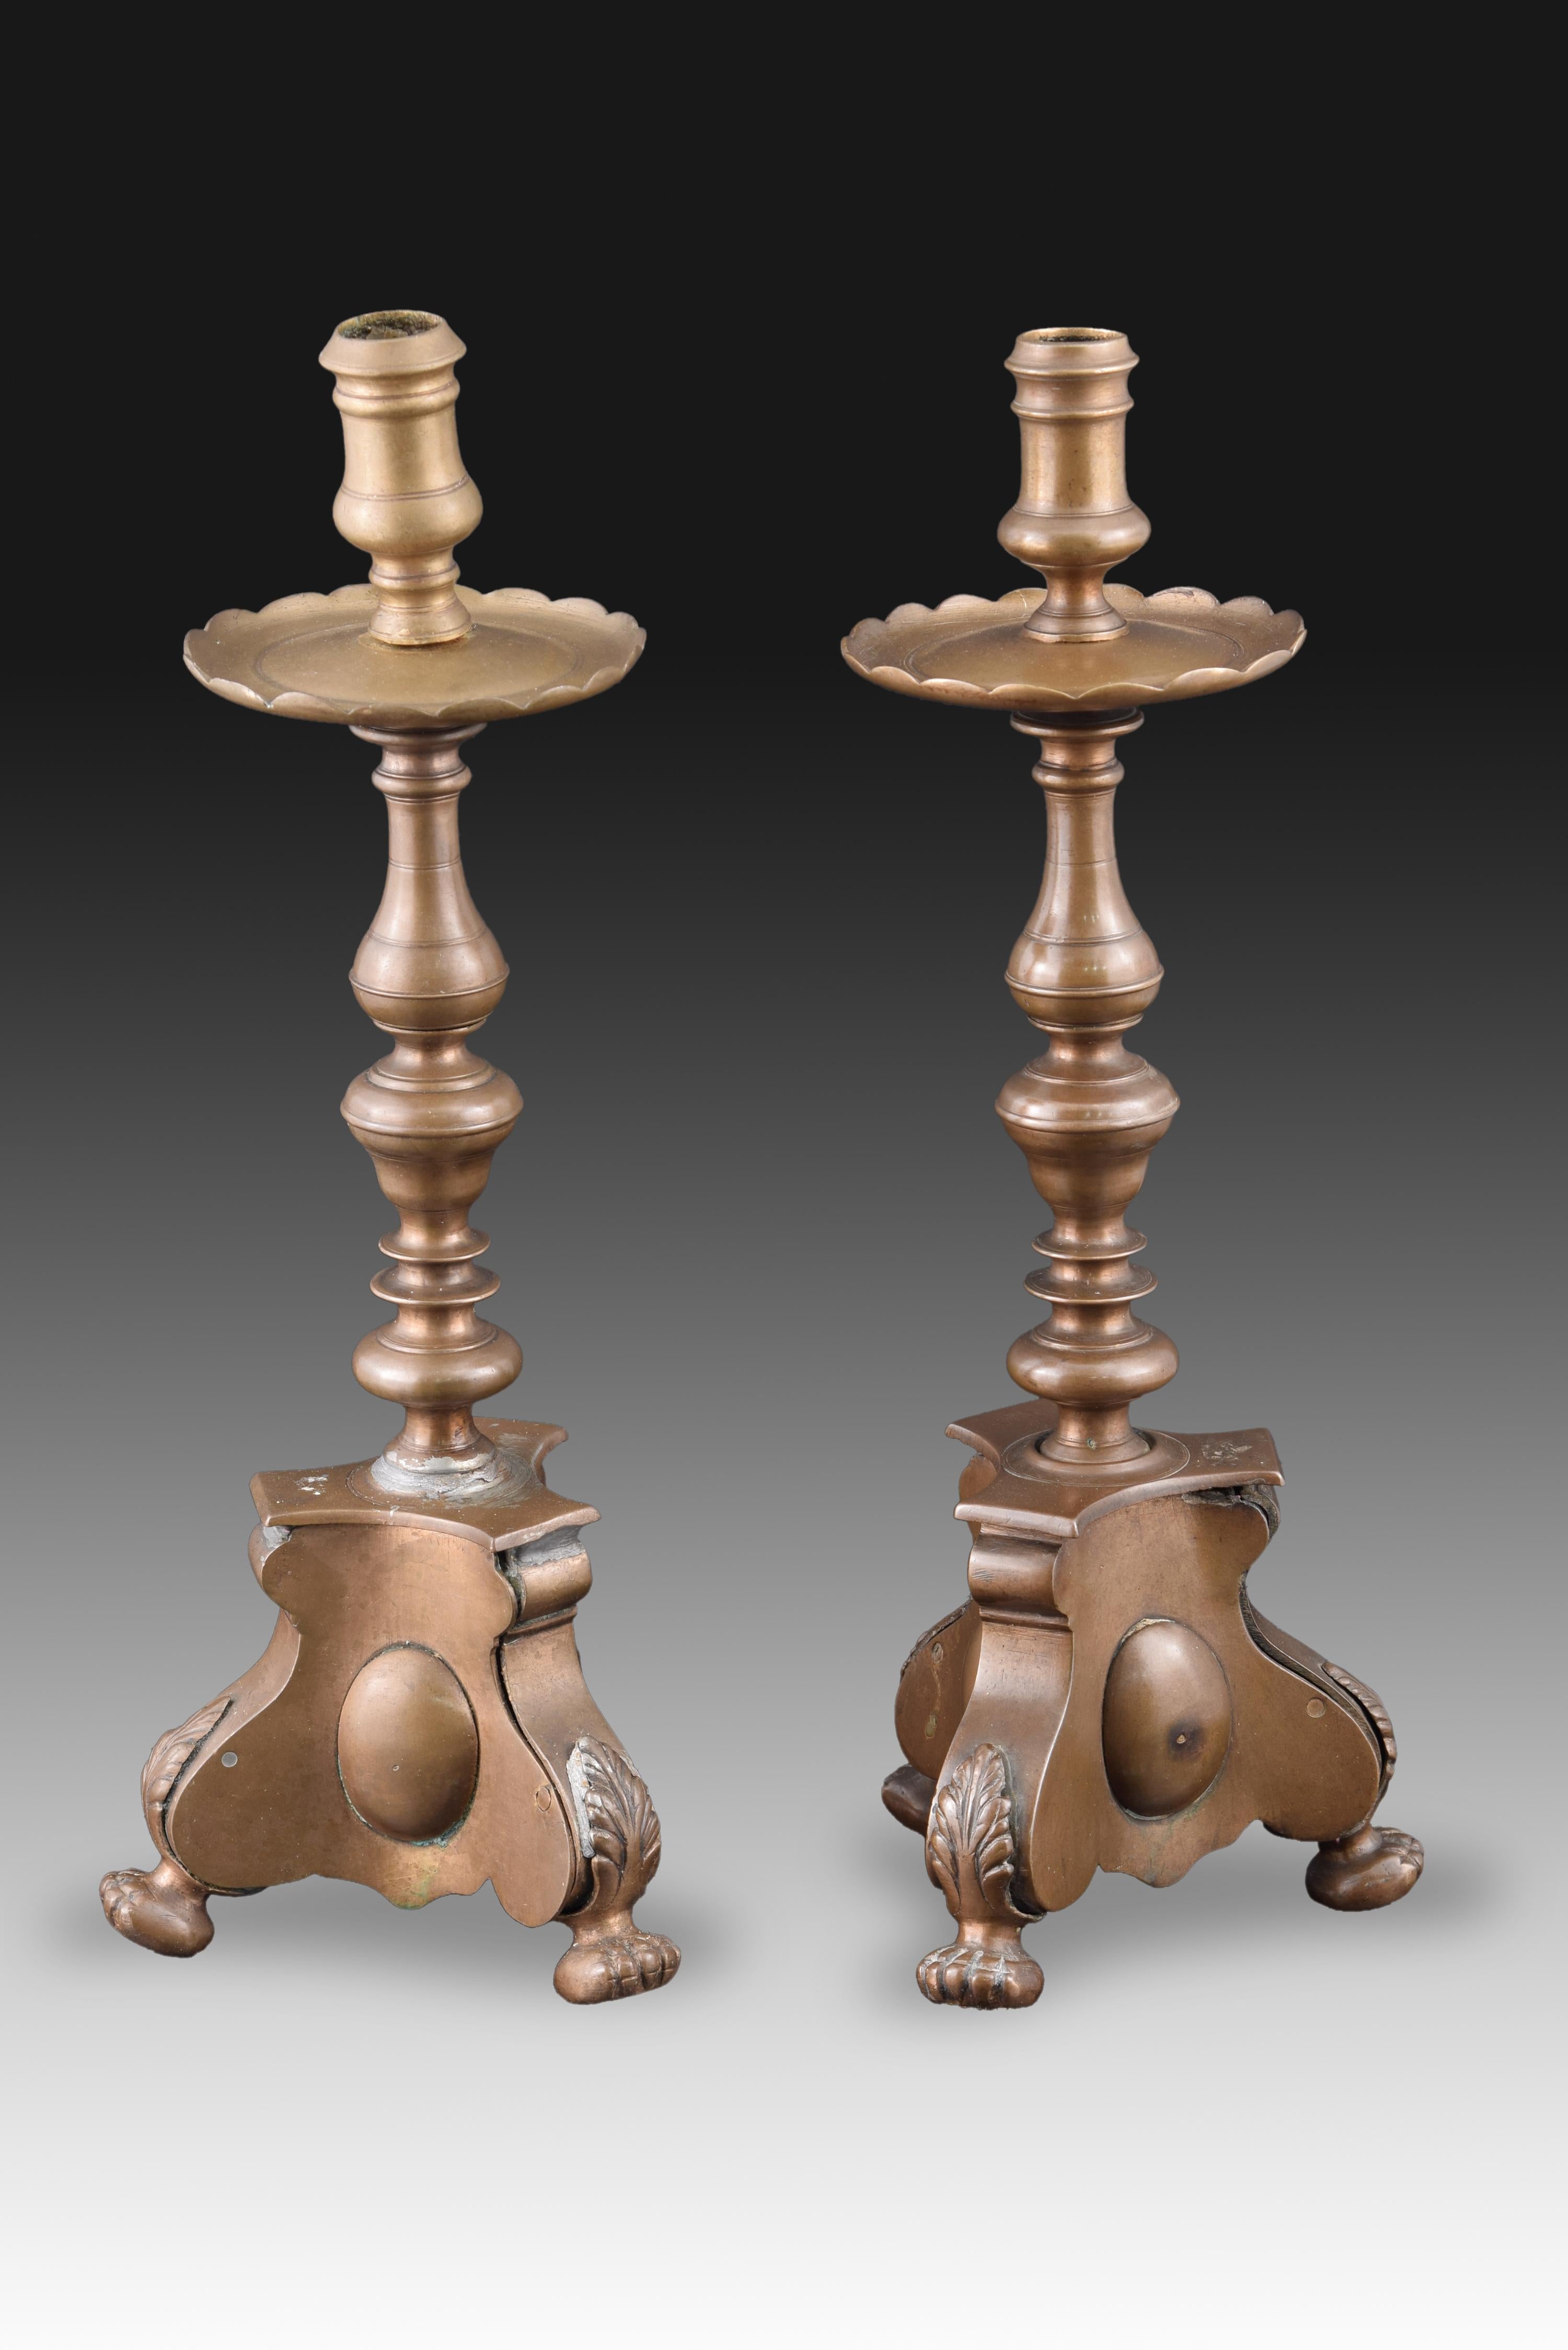 Pair of candlesticks. Bronze, 18th century.
Pair of bronze candlesticks, which still maintain a strong influence of Spanish Baroque models, especially in the turned axis, with prominent bases and spherical legs reminiscent of beast claws topped by